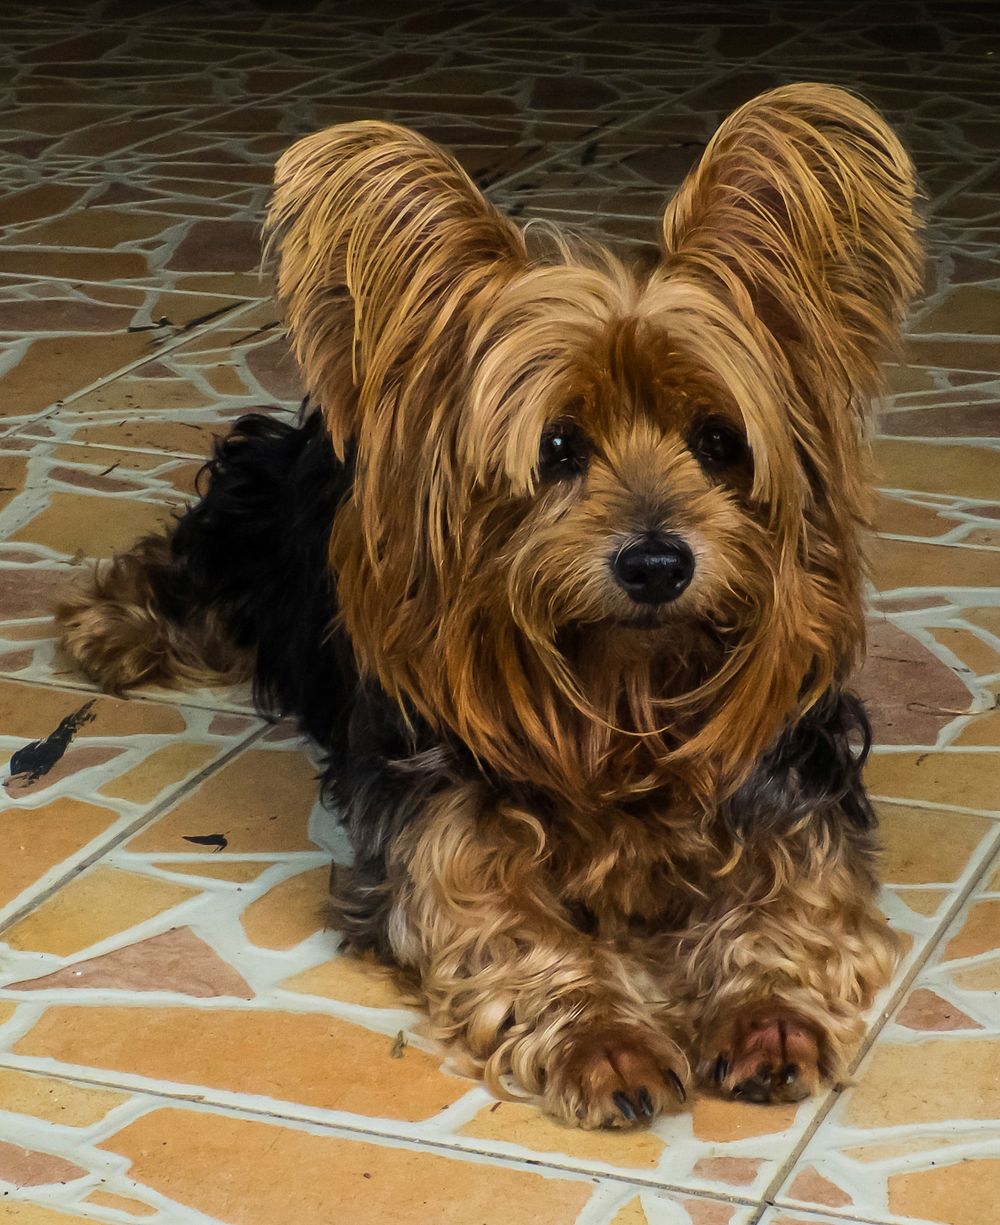 Yorkshire terrier sitting on tile floor. Original public domain image from Wikimedia Commons